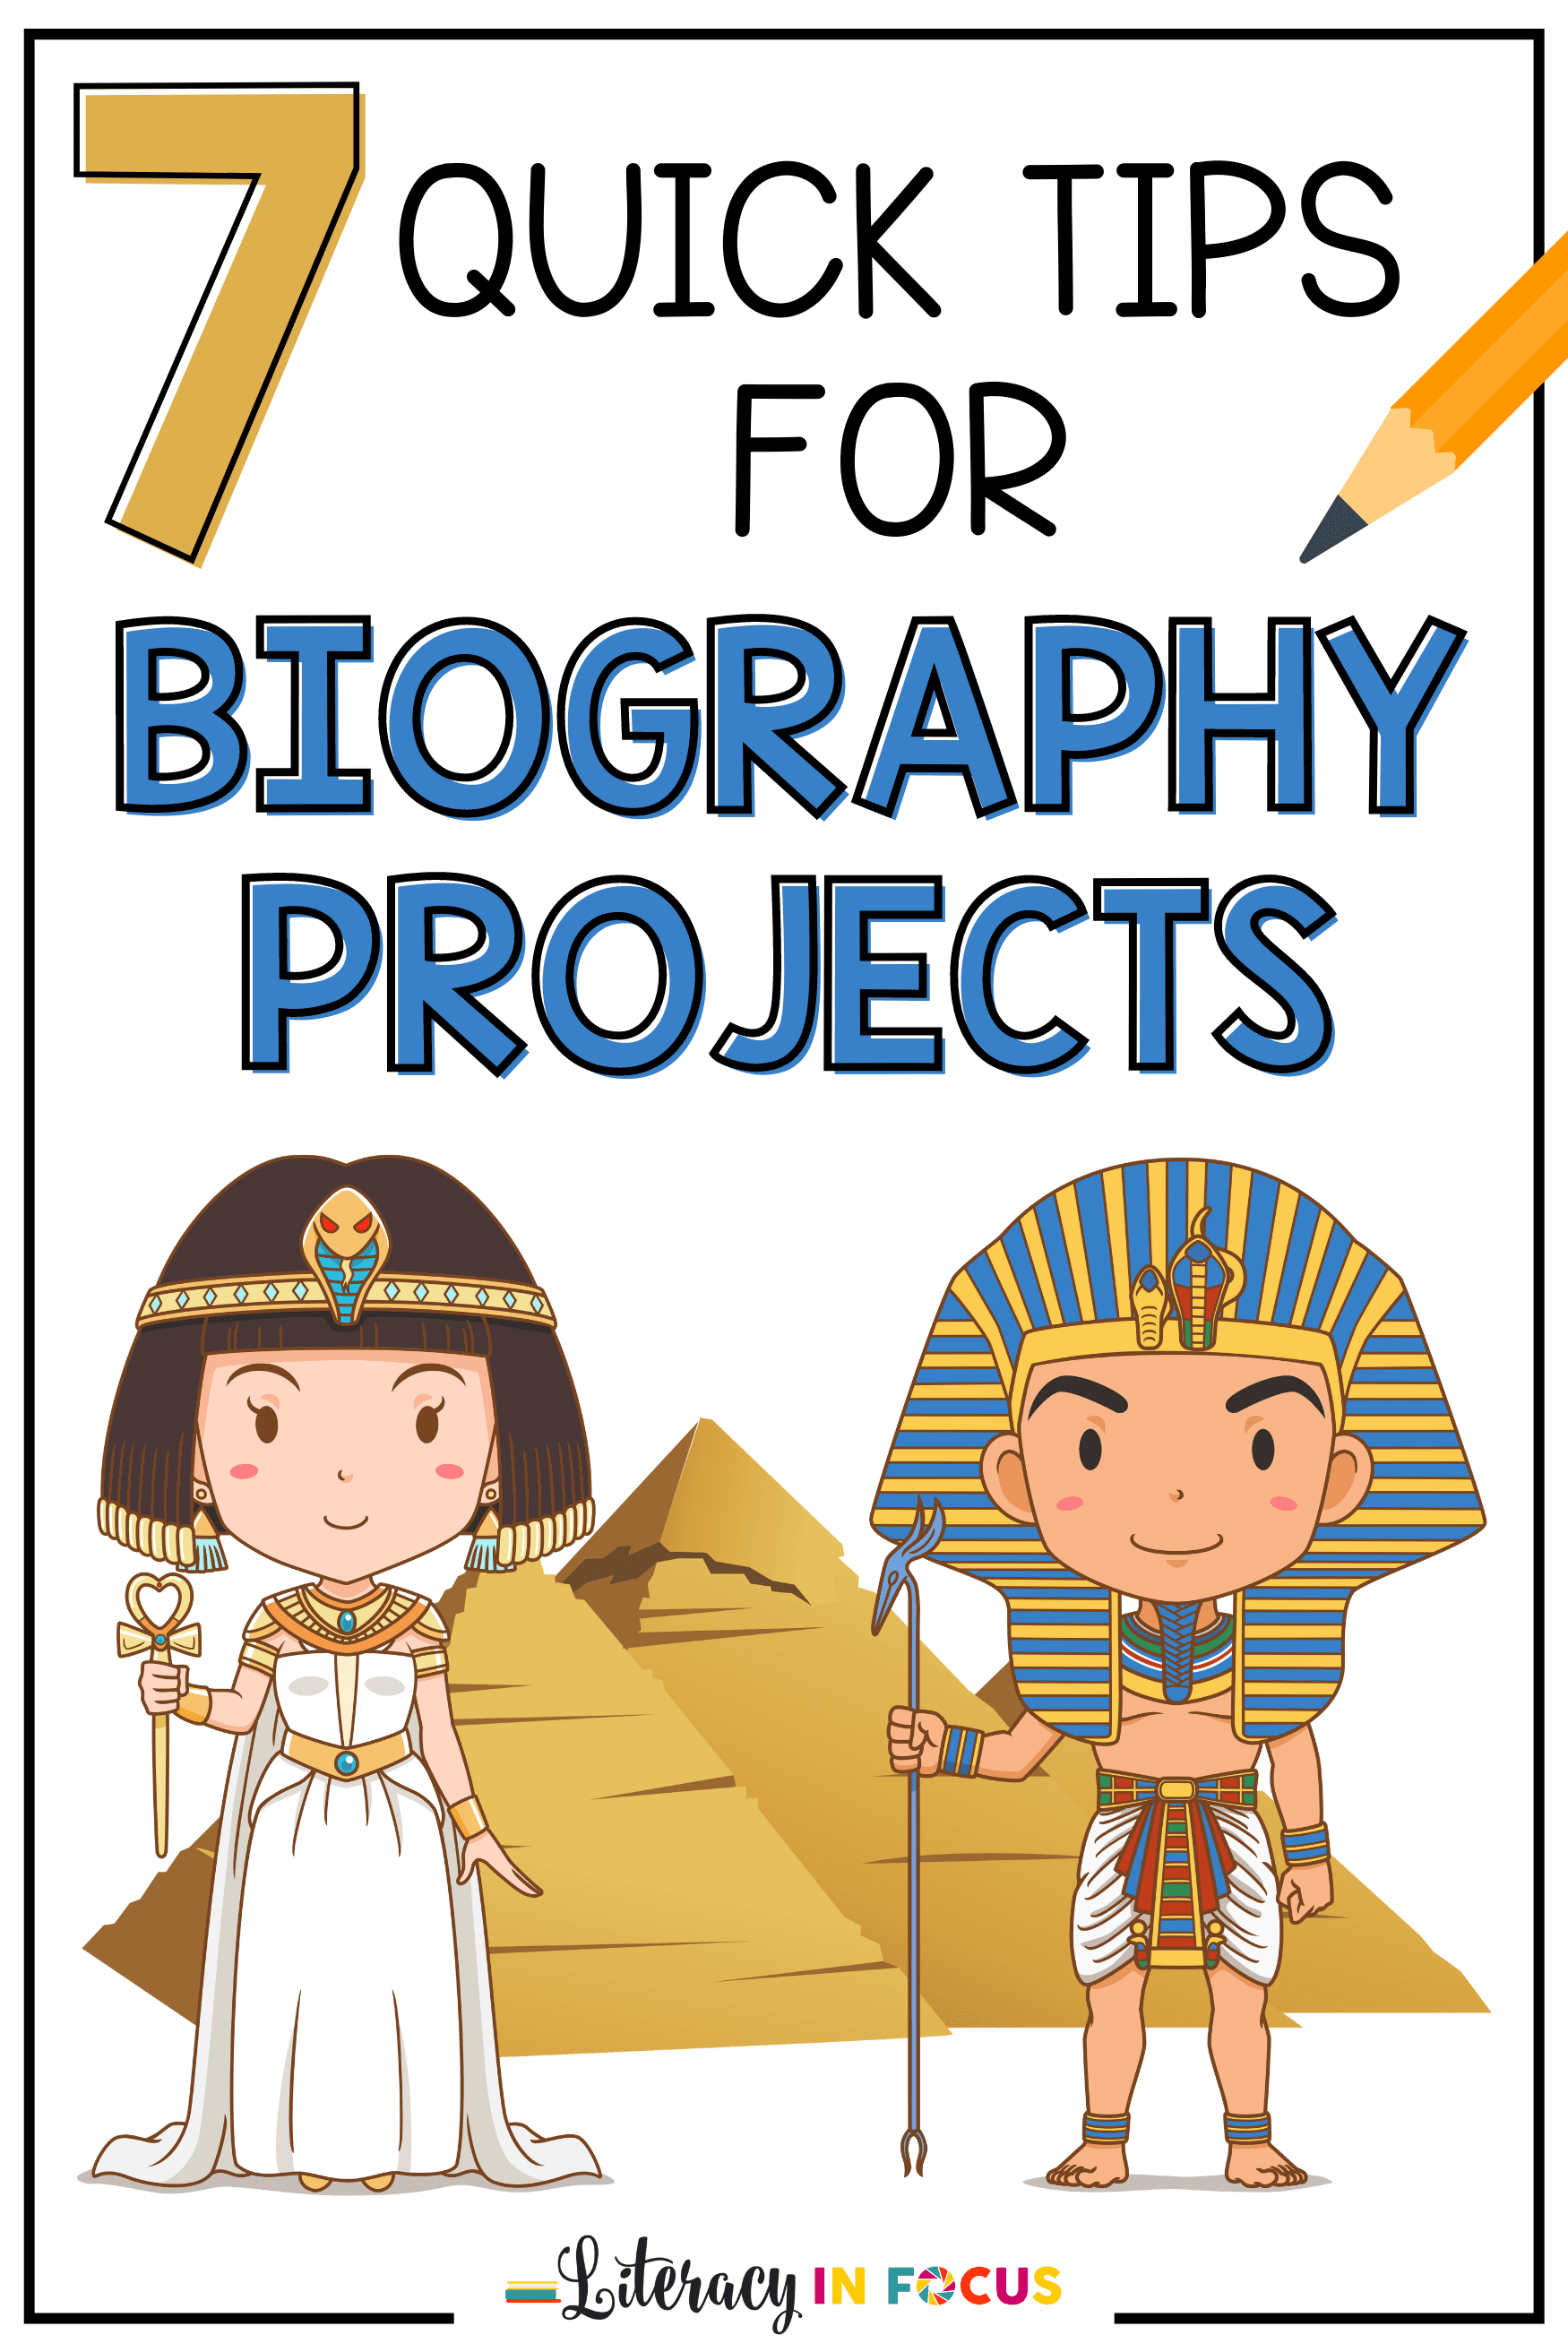 7 Quick Tips for Student Biography Projects